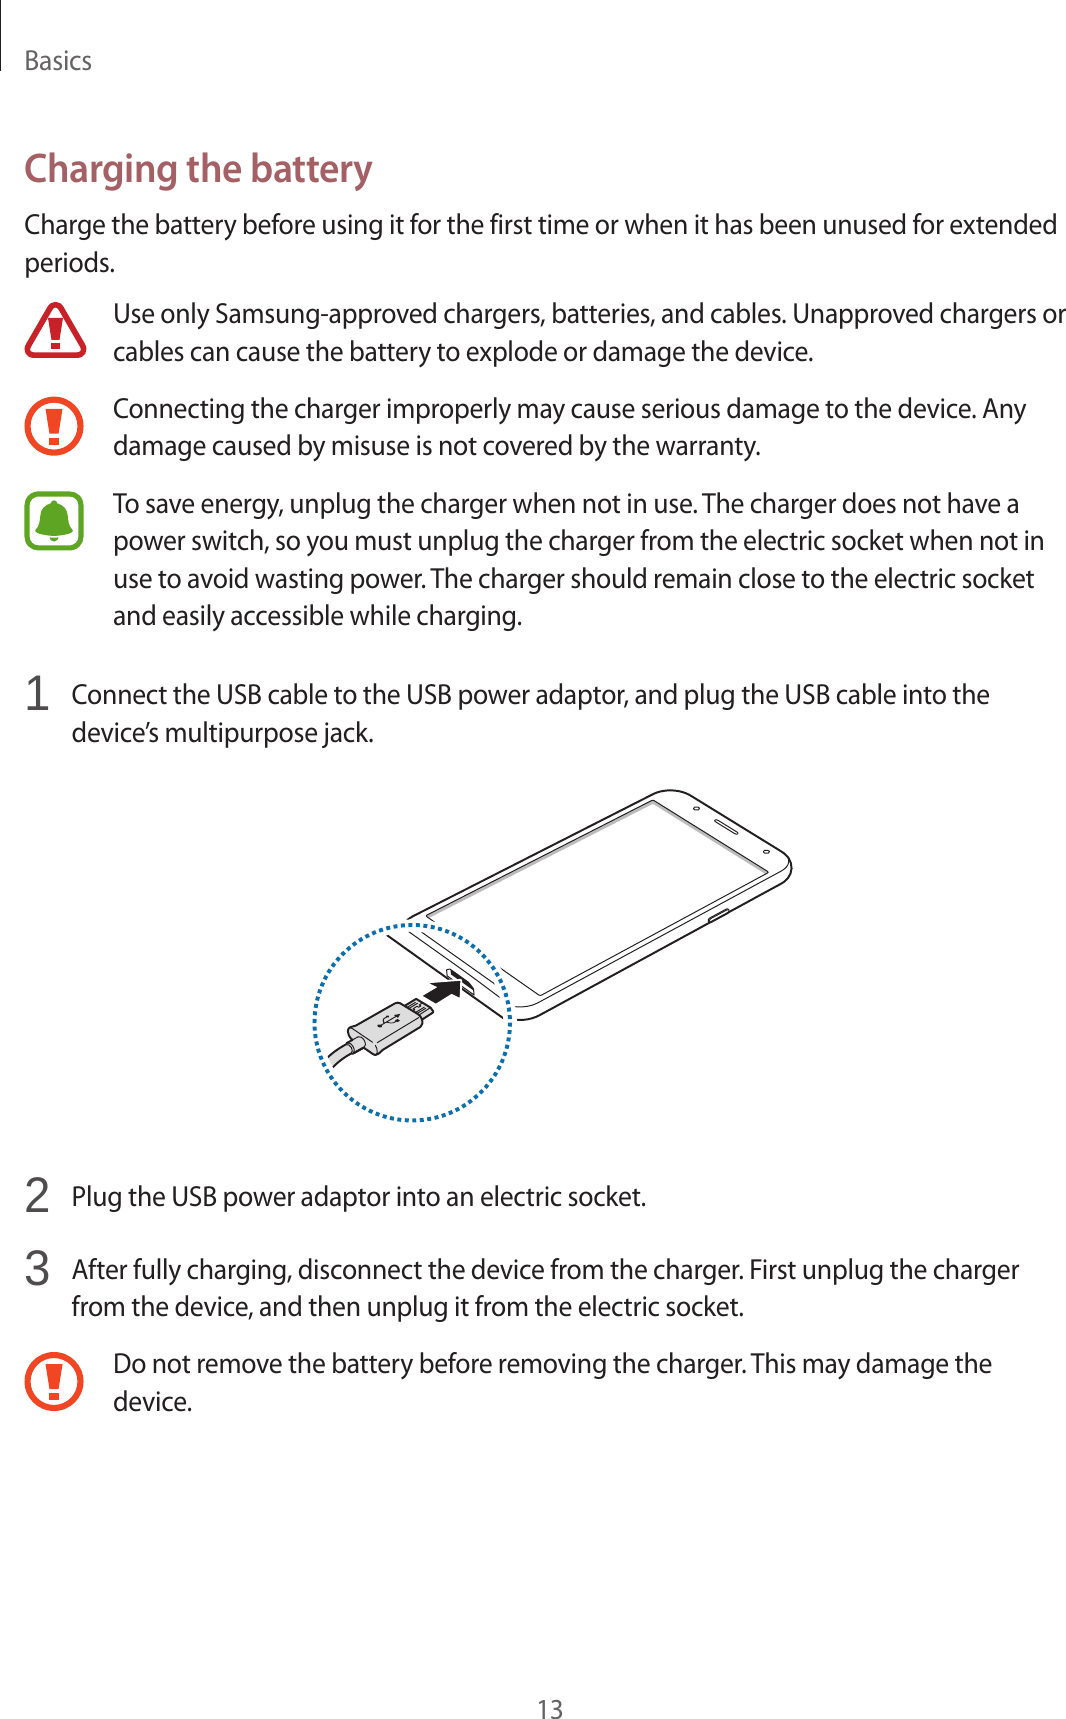 Basics13Charging the batteryCharge the battery before using it for the first time or when it has been unused for extended periods.Use only Samsung-approved chargers, batteries, and cables. Unapproved chargers or cables can cause the battery to explode or damage the device.Connecting the charger improperly may cause serious damage to the device. Any damage caused by misuse is not covered by the warranty.To save energy, unplug the charger when not in use. The charger does not have a power switch, so you must unplug the charger from the electric socket when not in use to avoid wasting power. The charger should remain close to the electric socket and easily accessible while charging.1  Connect the USB cable to the USB power adaptor, and plug the USB cable into the device’s multipurpose jack.2  Plug the USB power adaptor into an electric socket.3  After fully charging, disconnect the device from the charger. First unplug the charger from the device, and then unplug it from the electric socket.Do not remove the battery before removing the charger. This may damage the device.